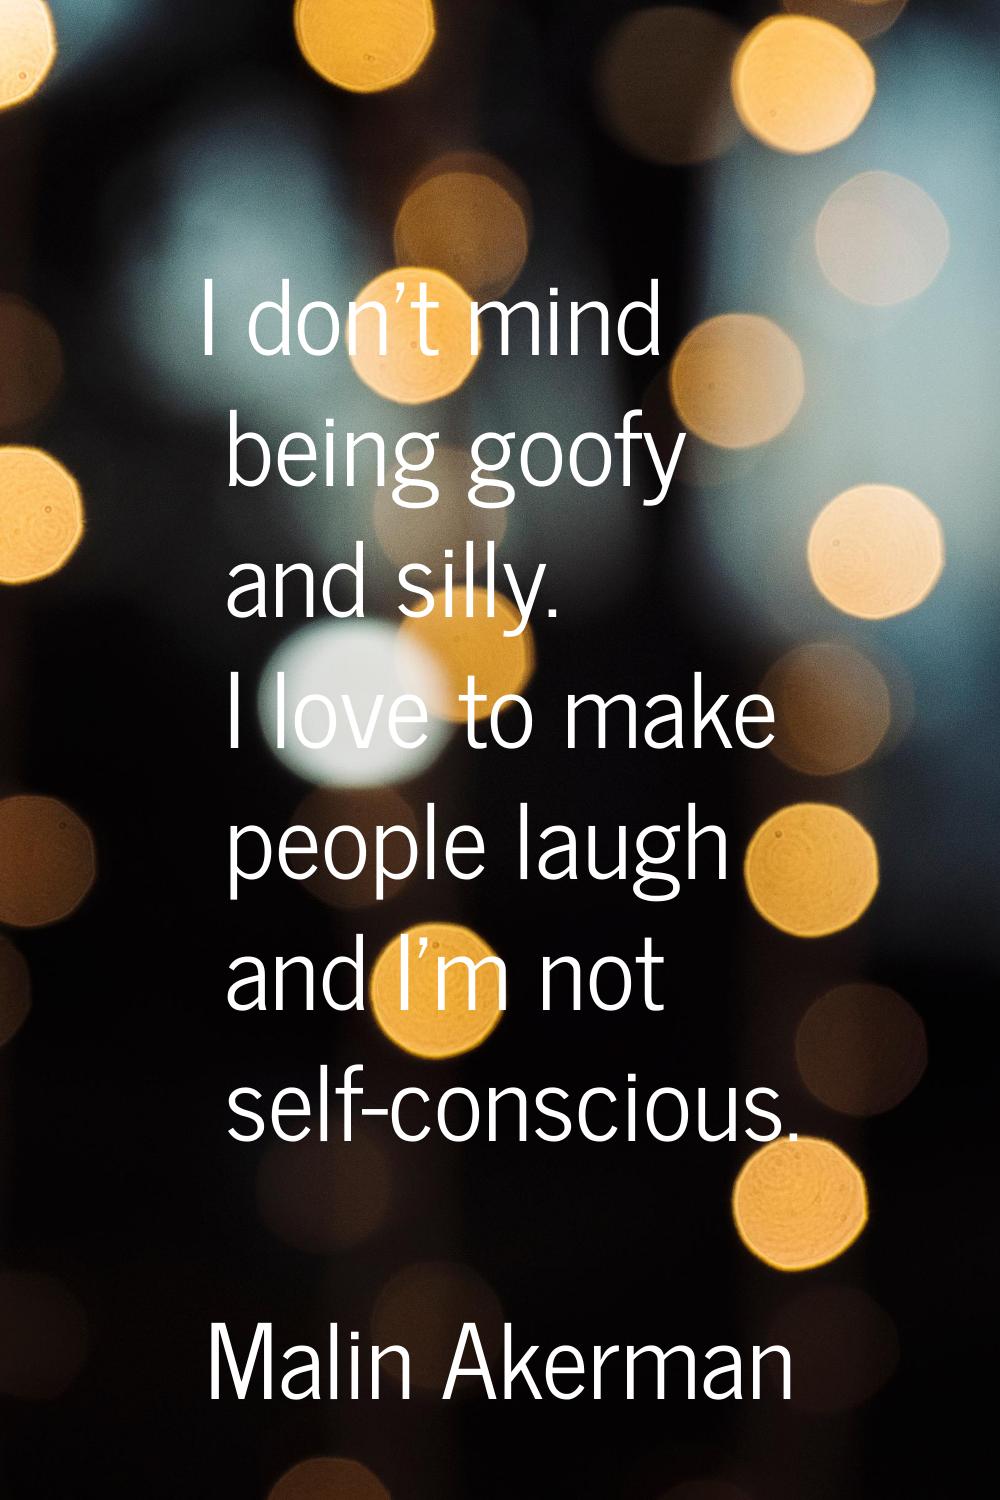 I don't mind being goofy and silly. I love to make people laugh and I'm not self-conscious.